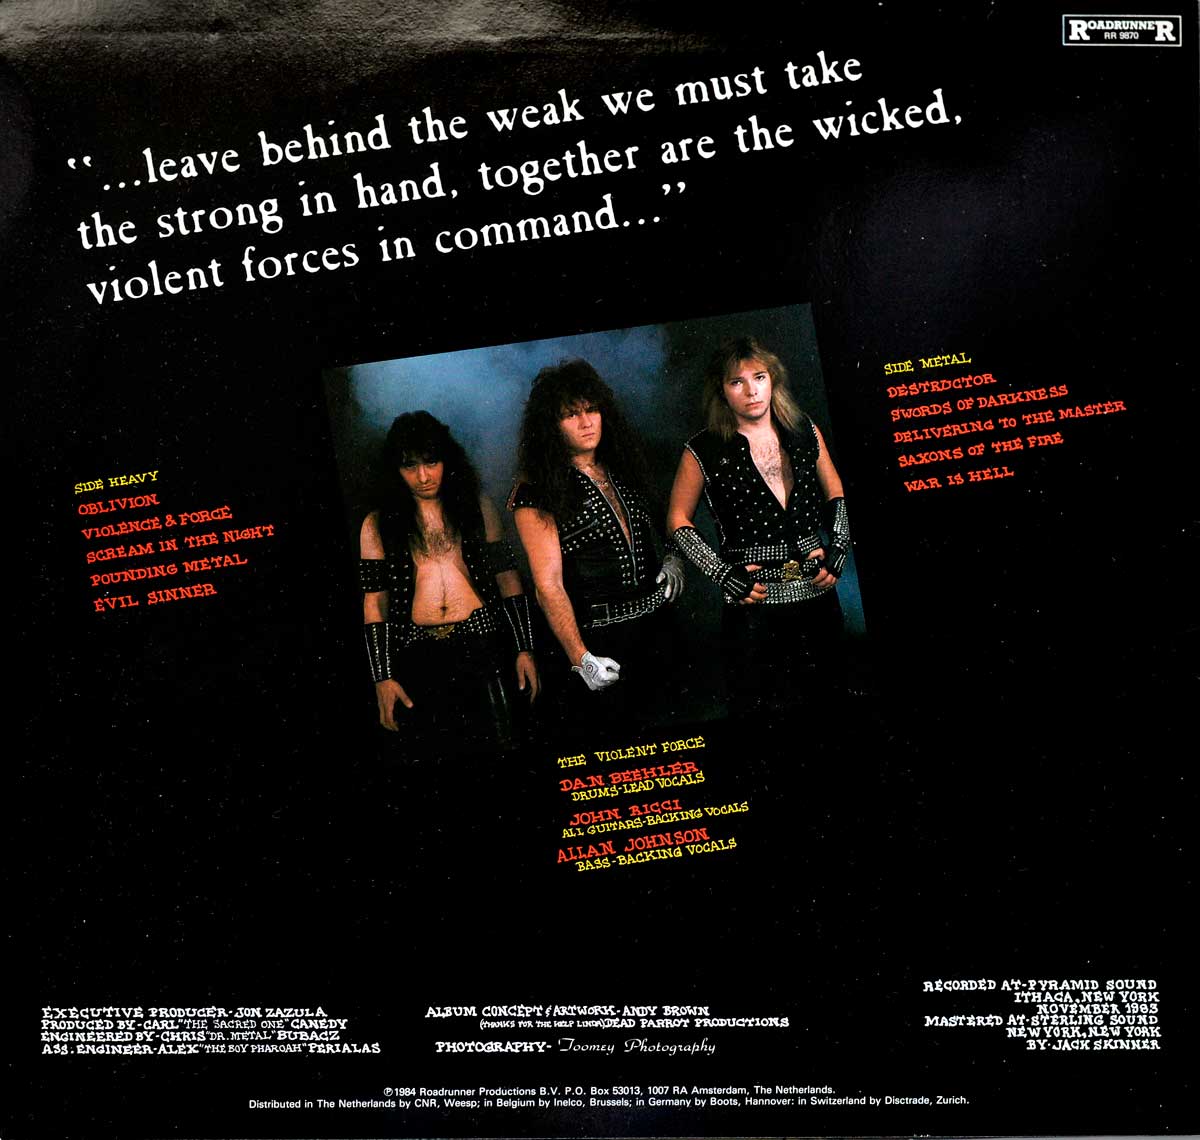 High Resolution Photo Album Back Cover of EXCITER Violence & Force https://vinyl-records.nl